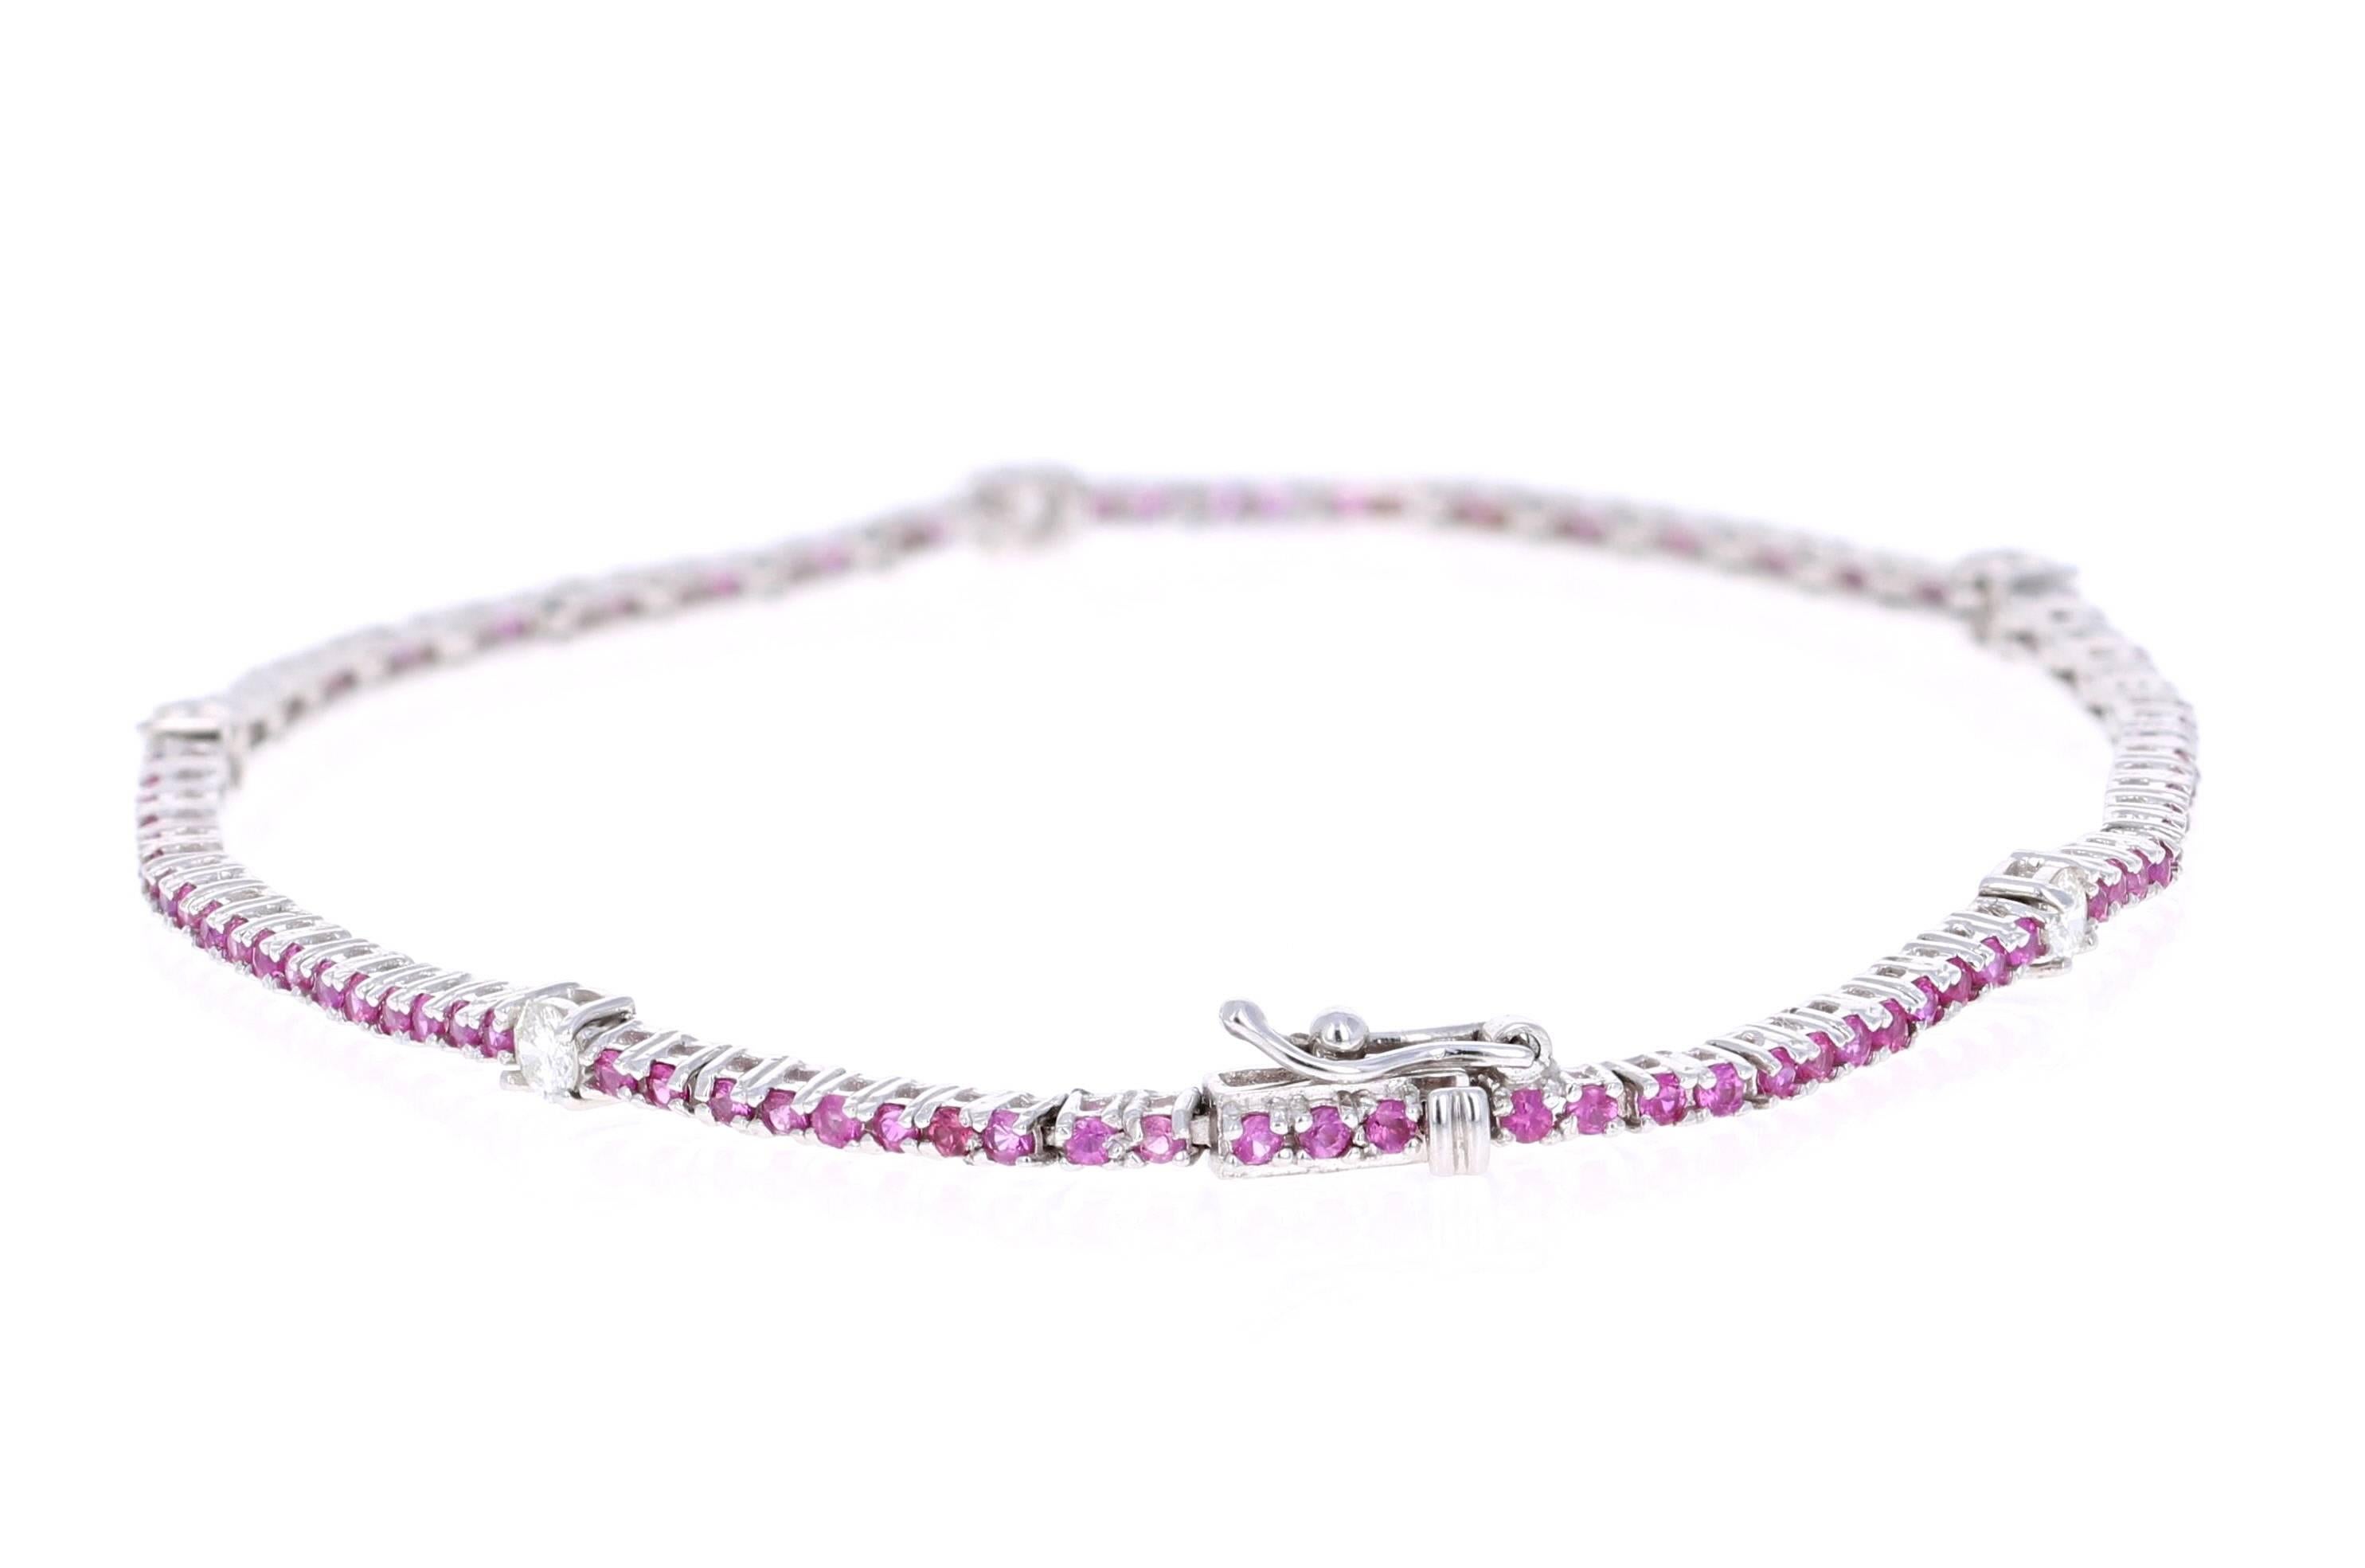 Dainty, Delicate, and Beautiful. 
A 14K White Gold Pink Sapphire and Diamond Bracelet. 

The 98 Round Cut Pink Sapphires are 1.02 carats and the 5 Round Cut Diamonds are 0.32 carats, with a total carat weight of 1.34 carats. 

It has a gold gram